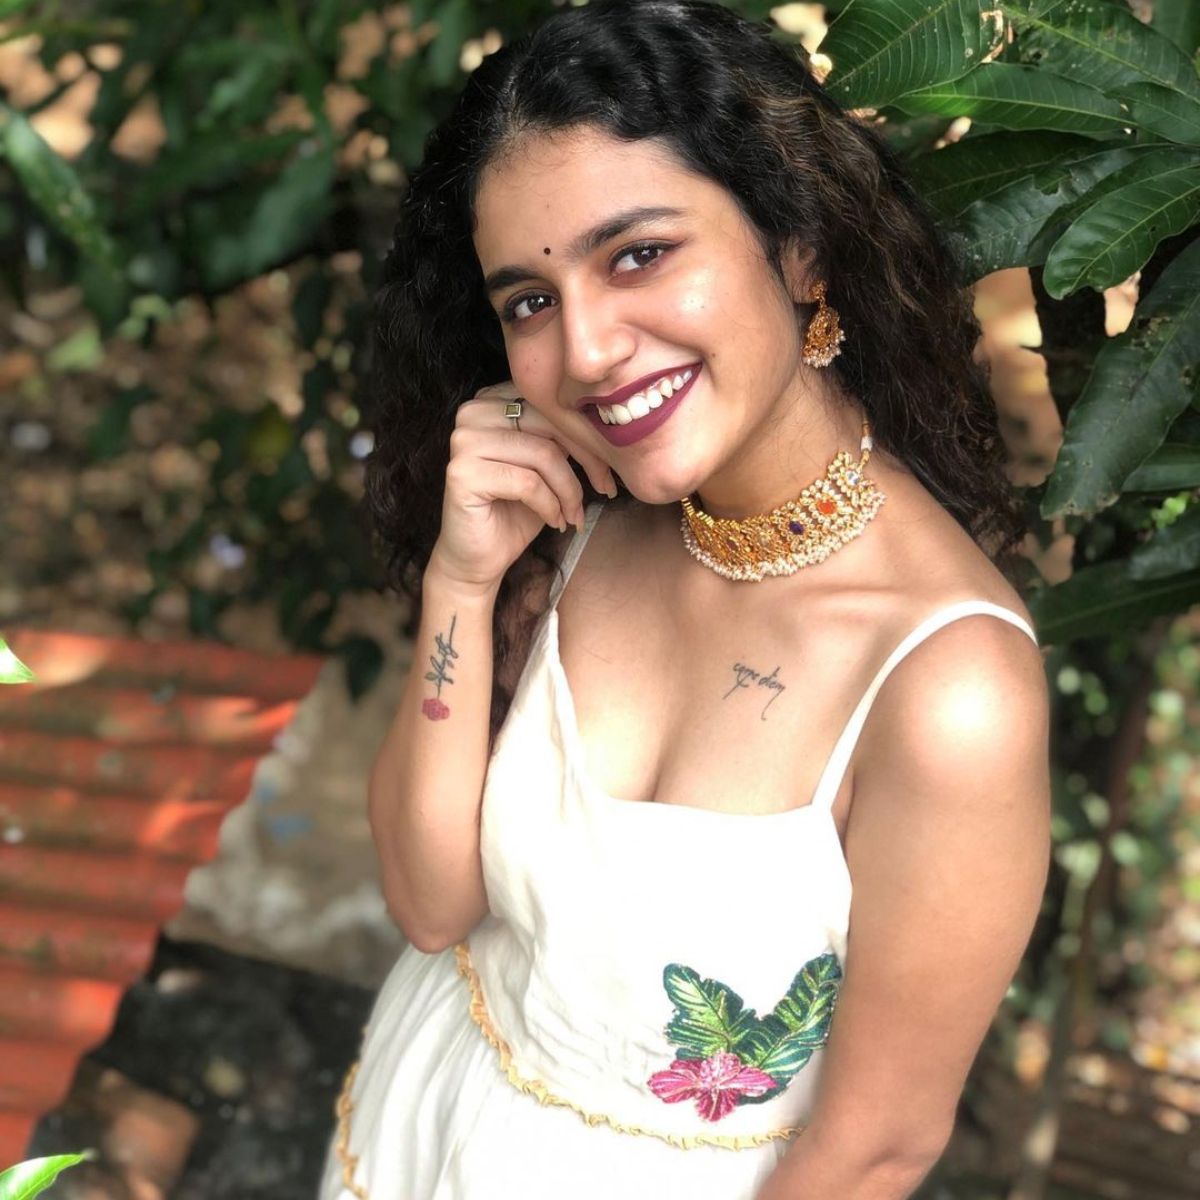 EXCLUSIVE: Priya Varrier says 'luck favoured' her as she opens up on gaining popularity at an early age